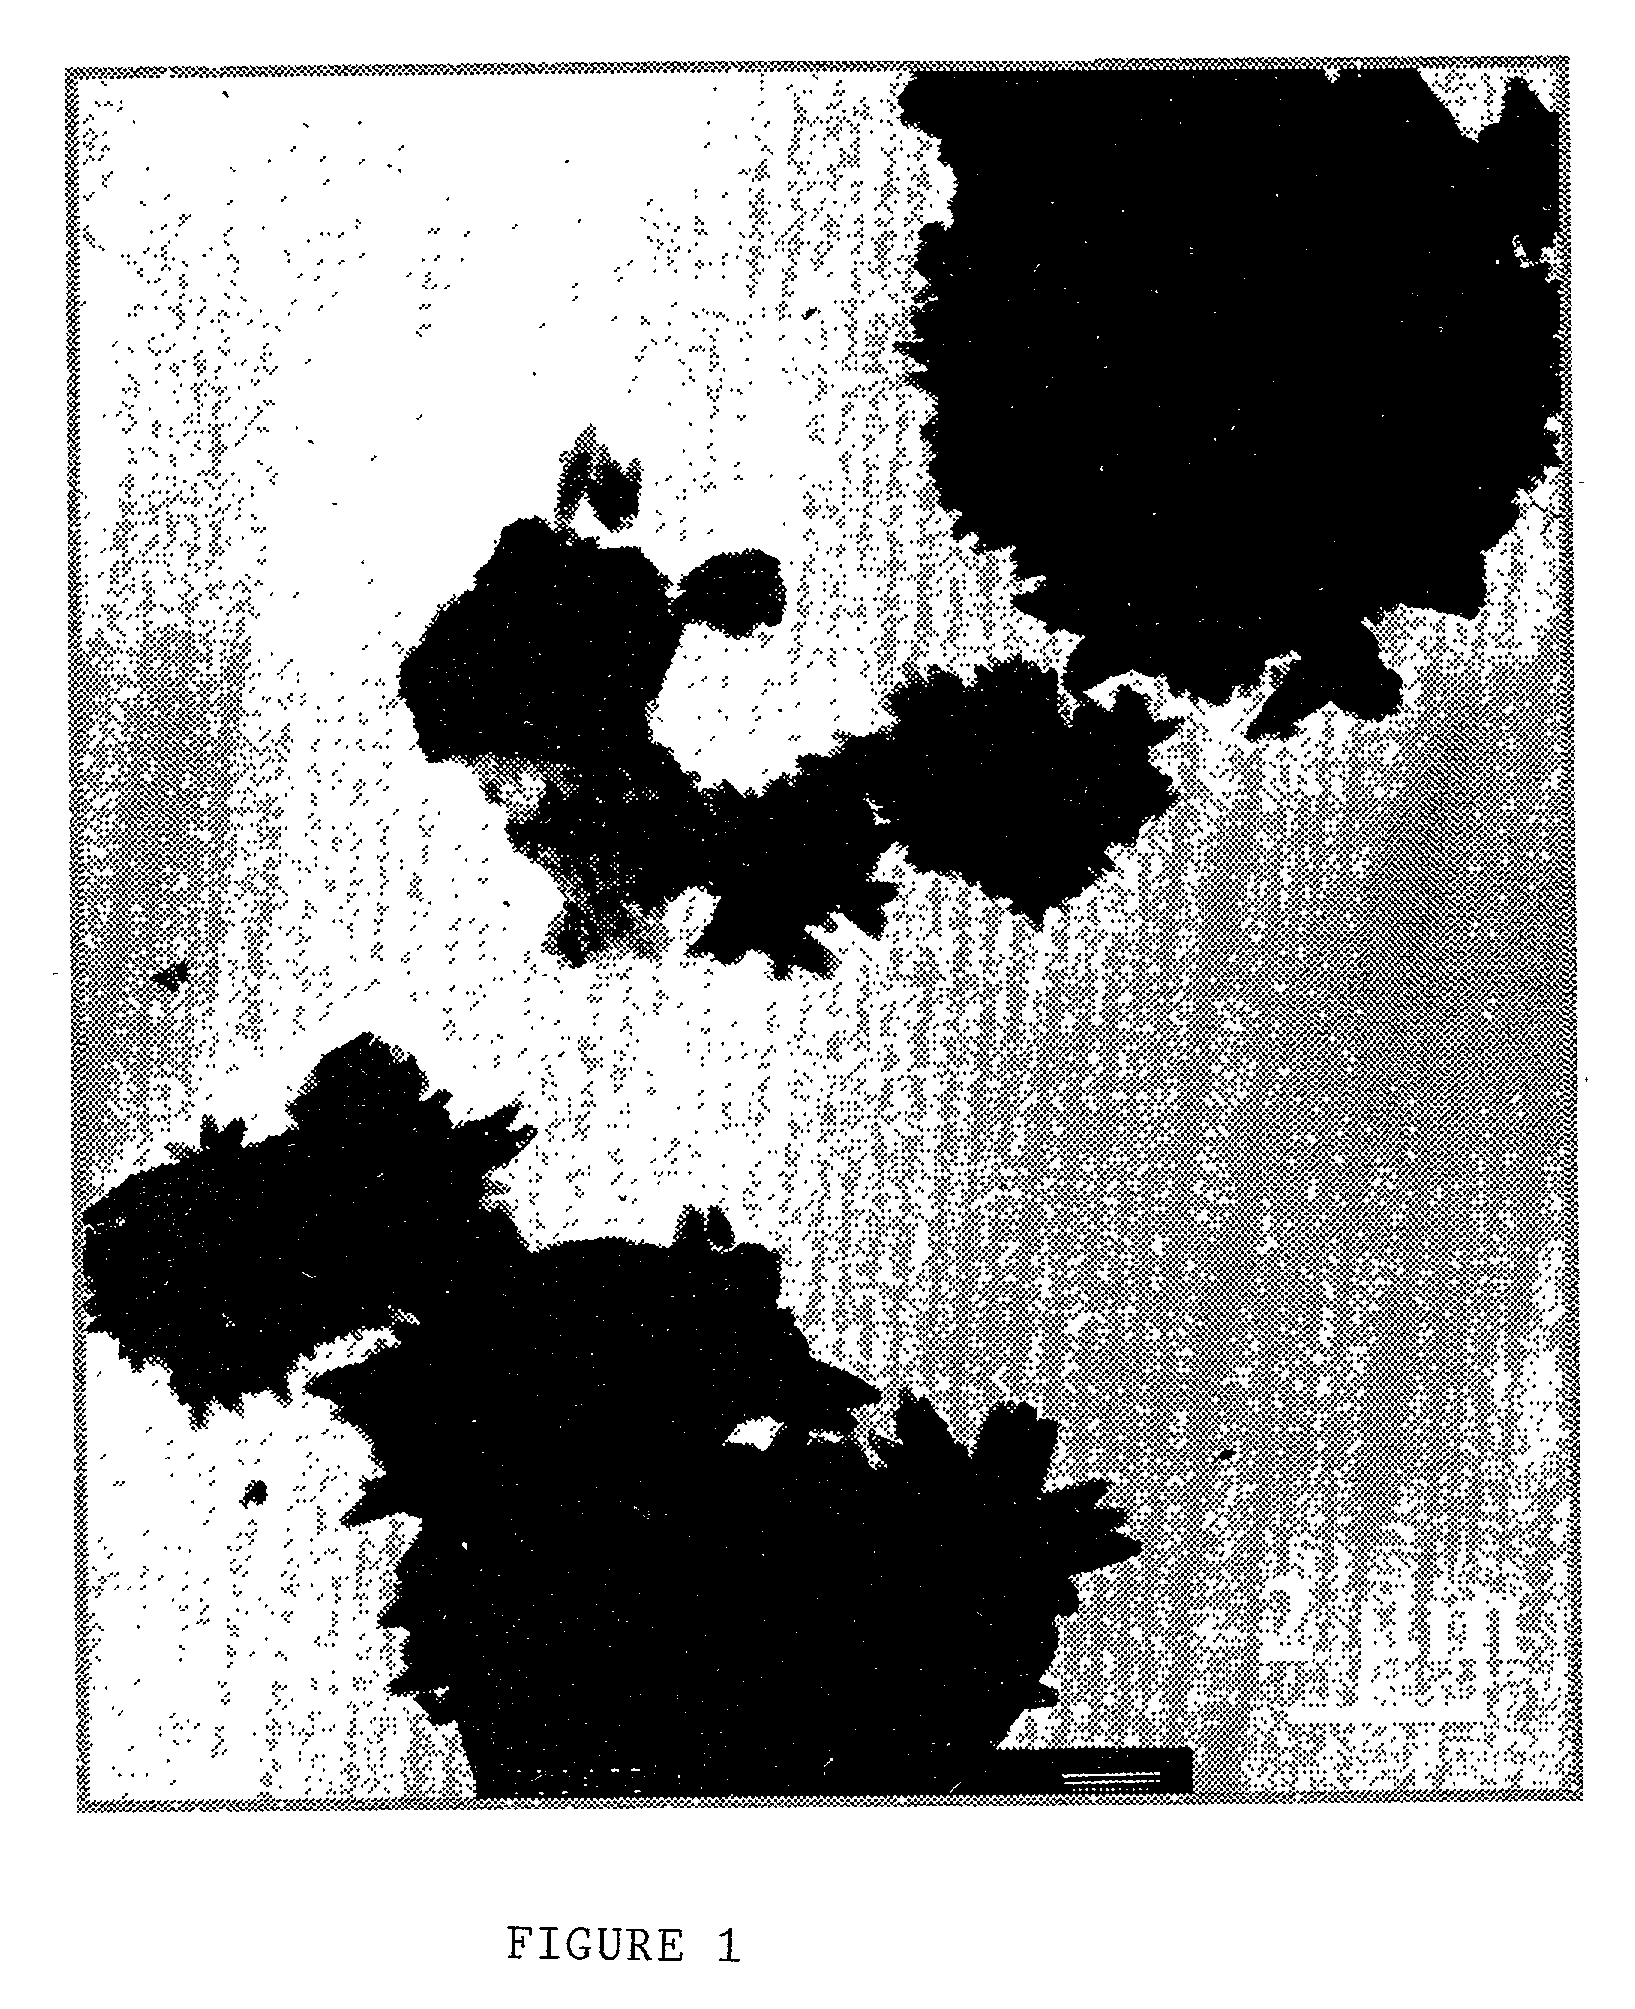 Superfine powders and methods for manufacture of said powders